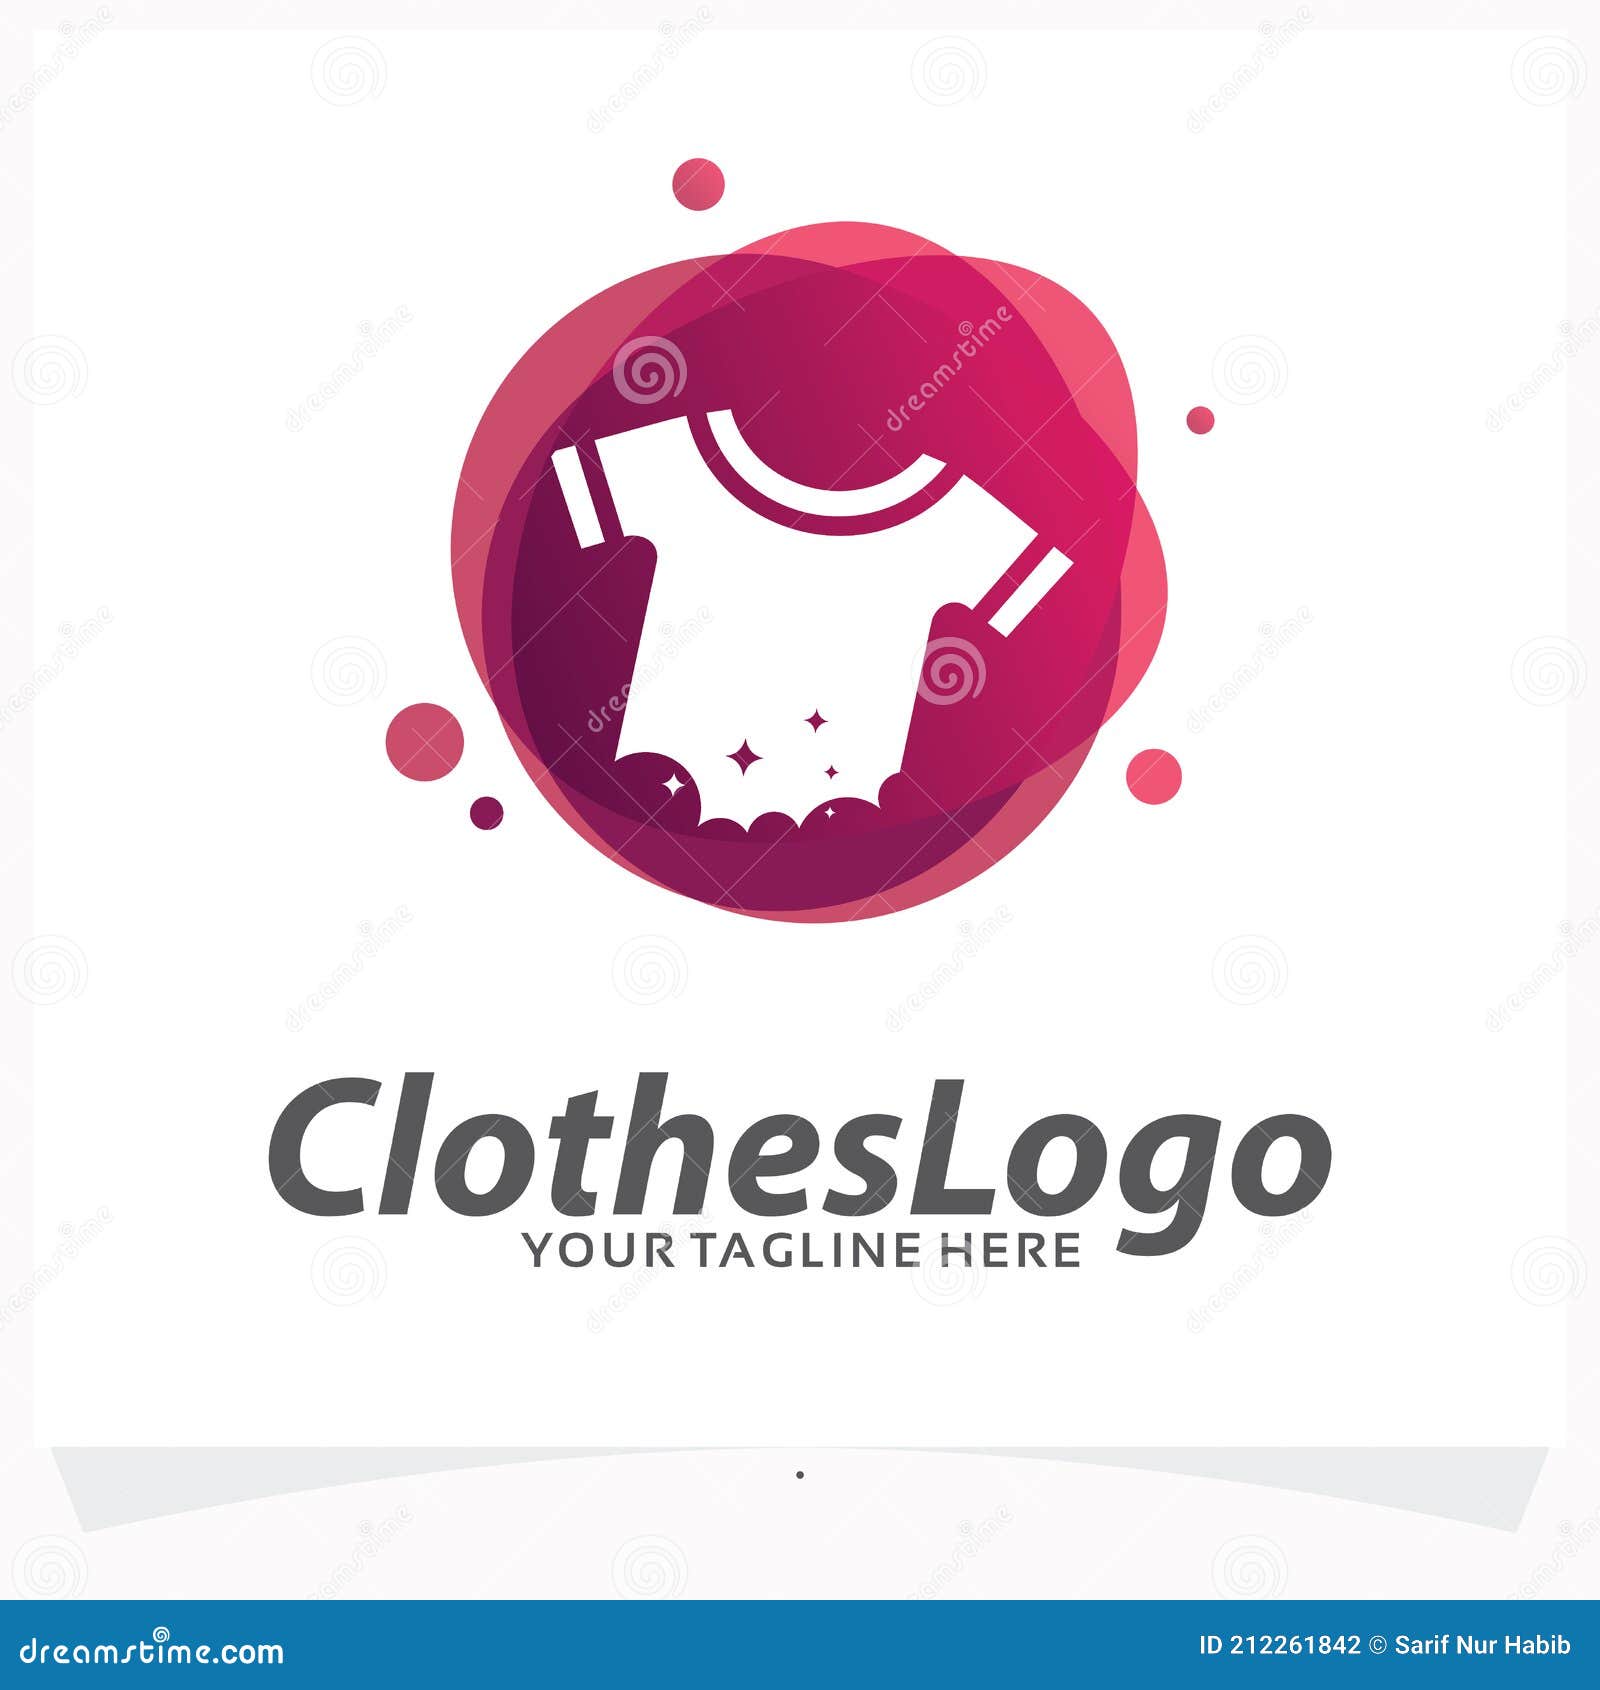 Clothes Logo Design Template Stock Vector - Illustration of office ...